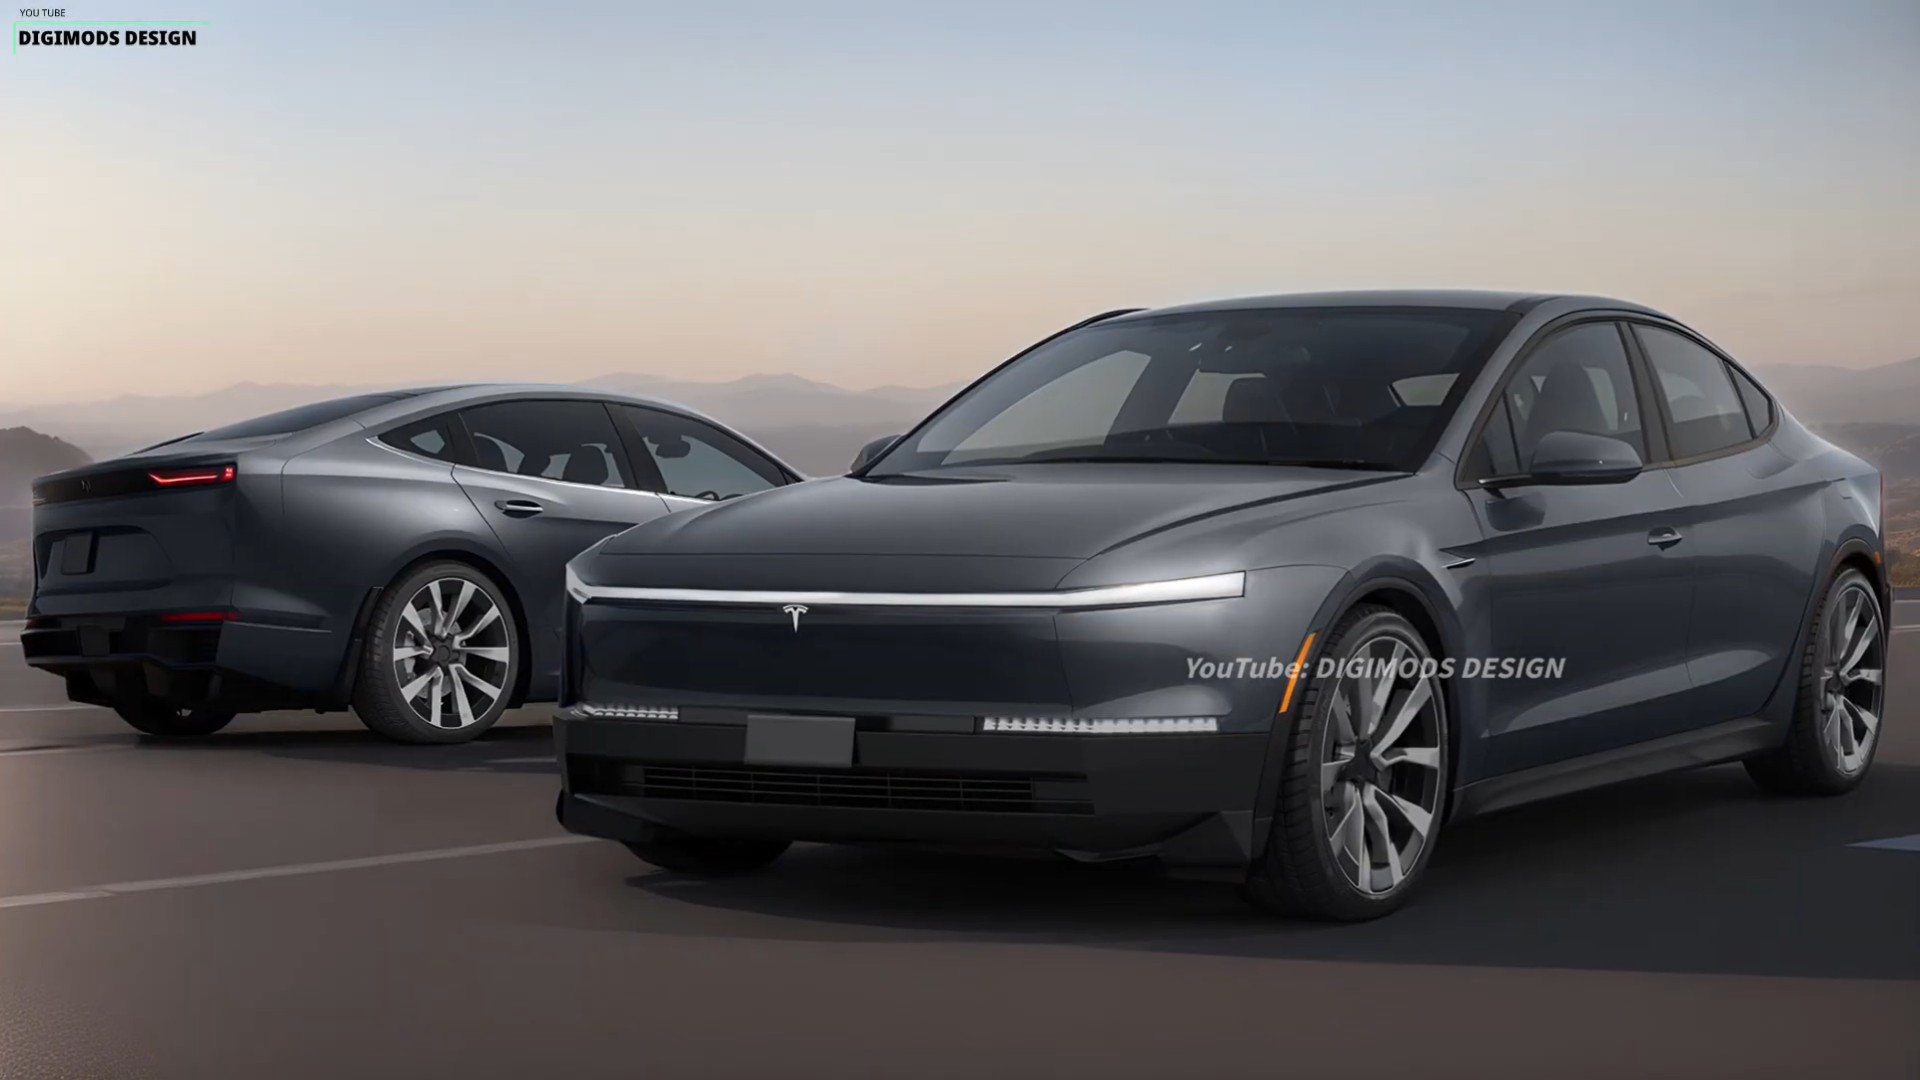 https://s1.cdn.autoevolution.com/images/news/tesla-model-2-may-become-their-cheapest-ev-but-doesn-t-look-the-part-in-unofficial-cgis-226854_1.jpg